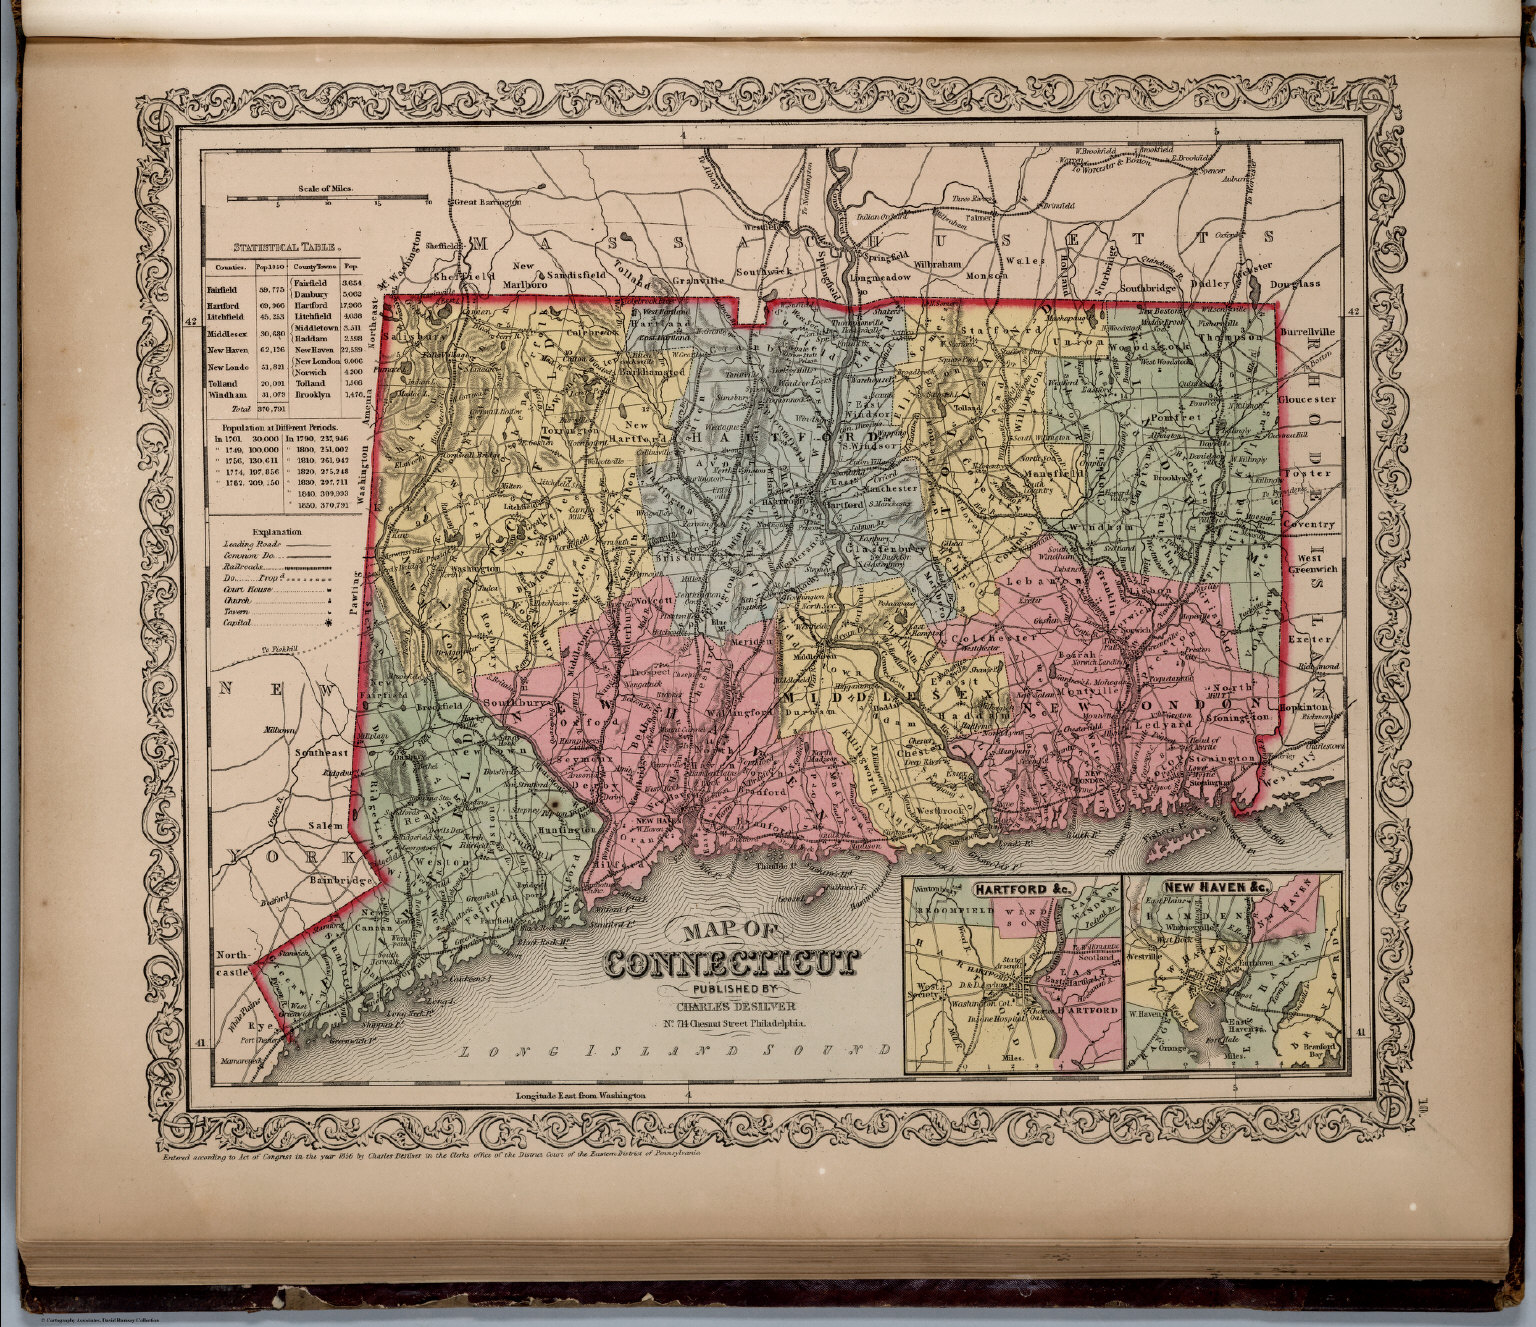 Connecticut David Rumsey Historical Map Collection